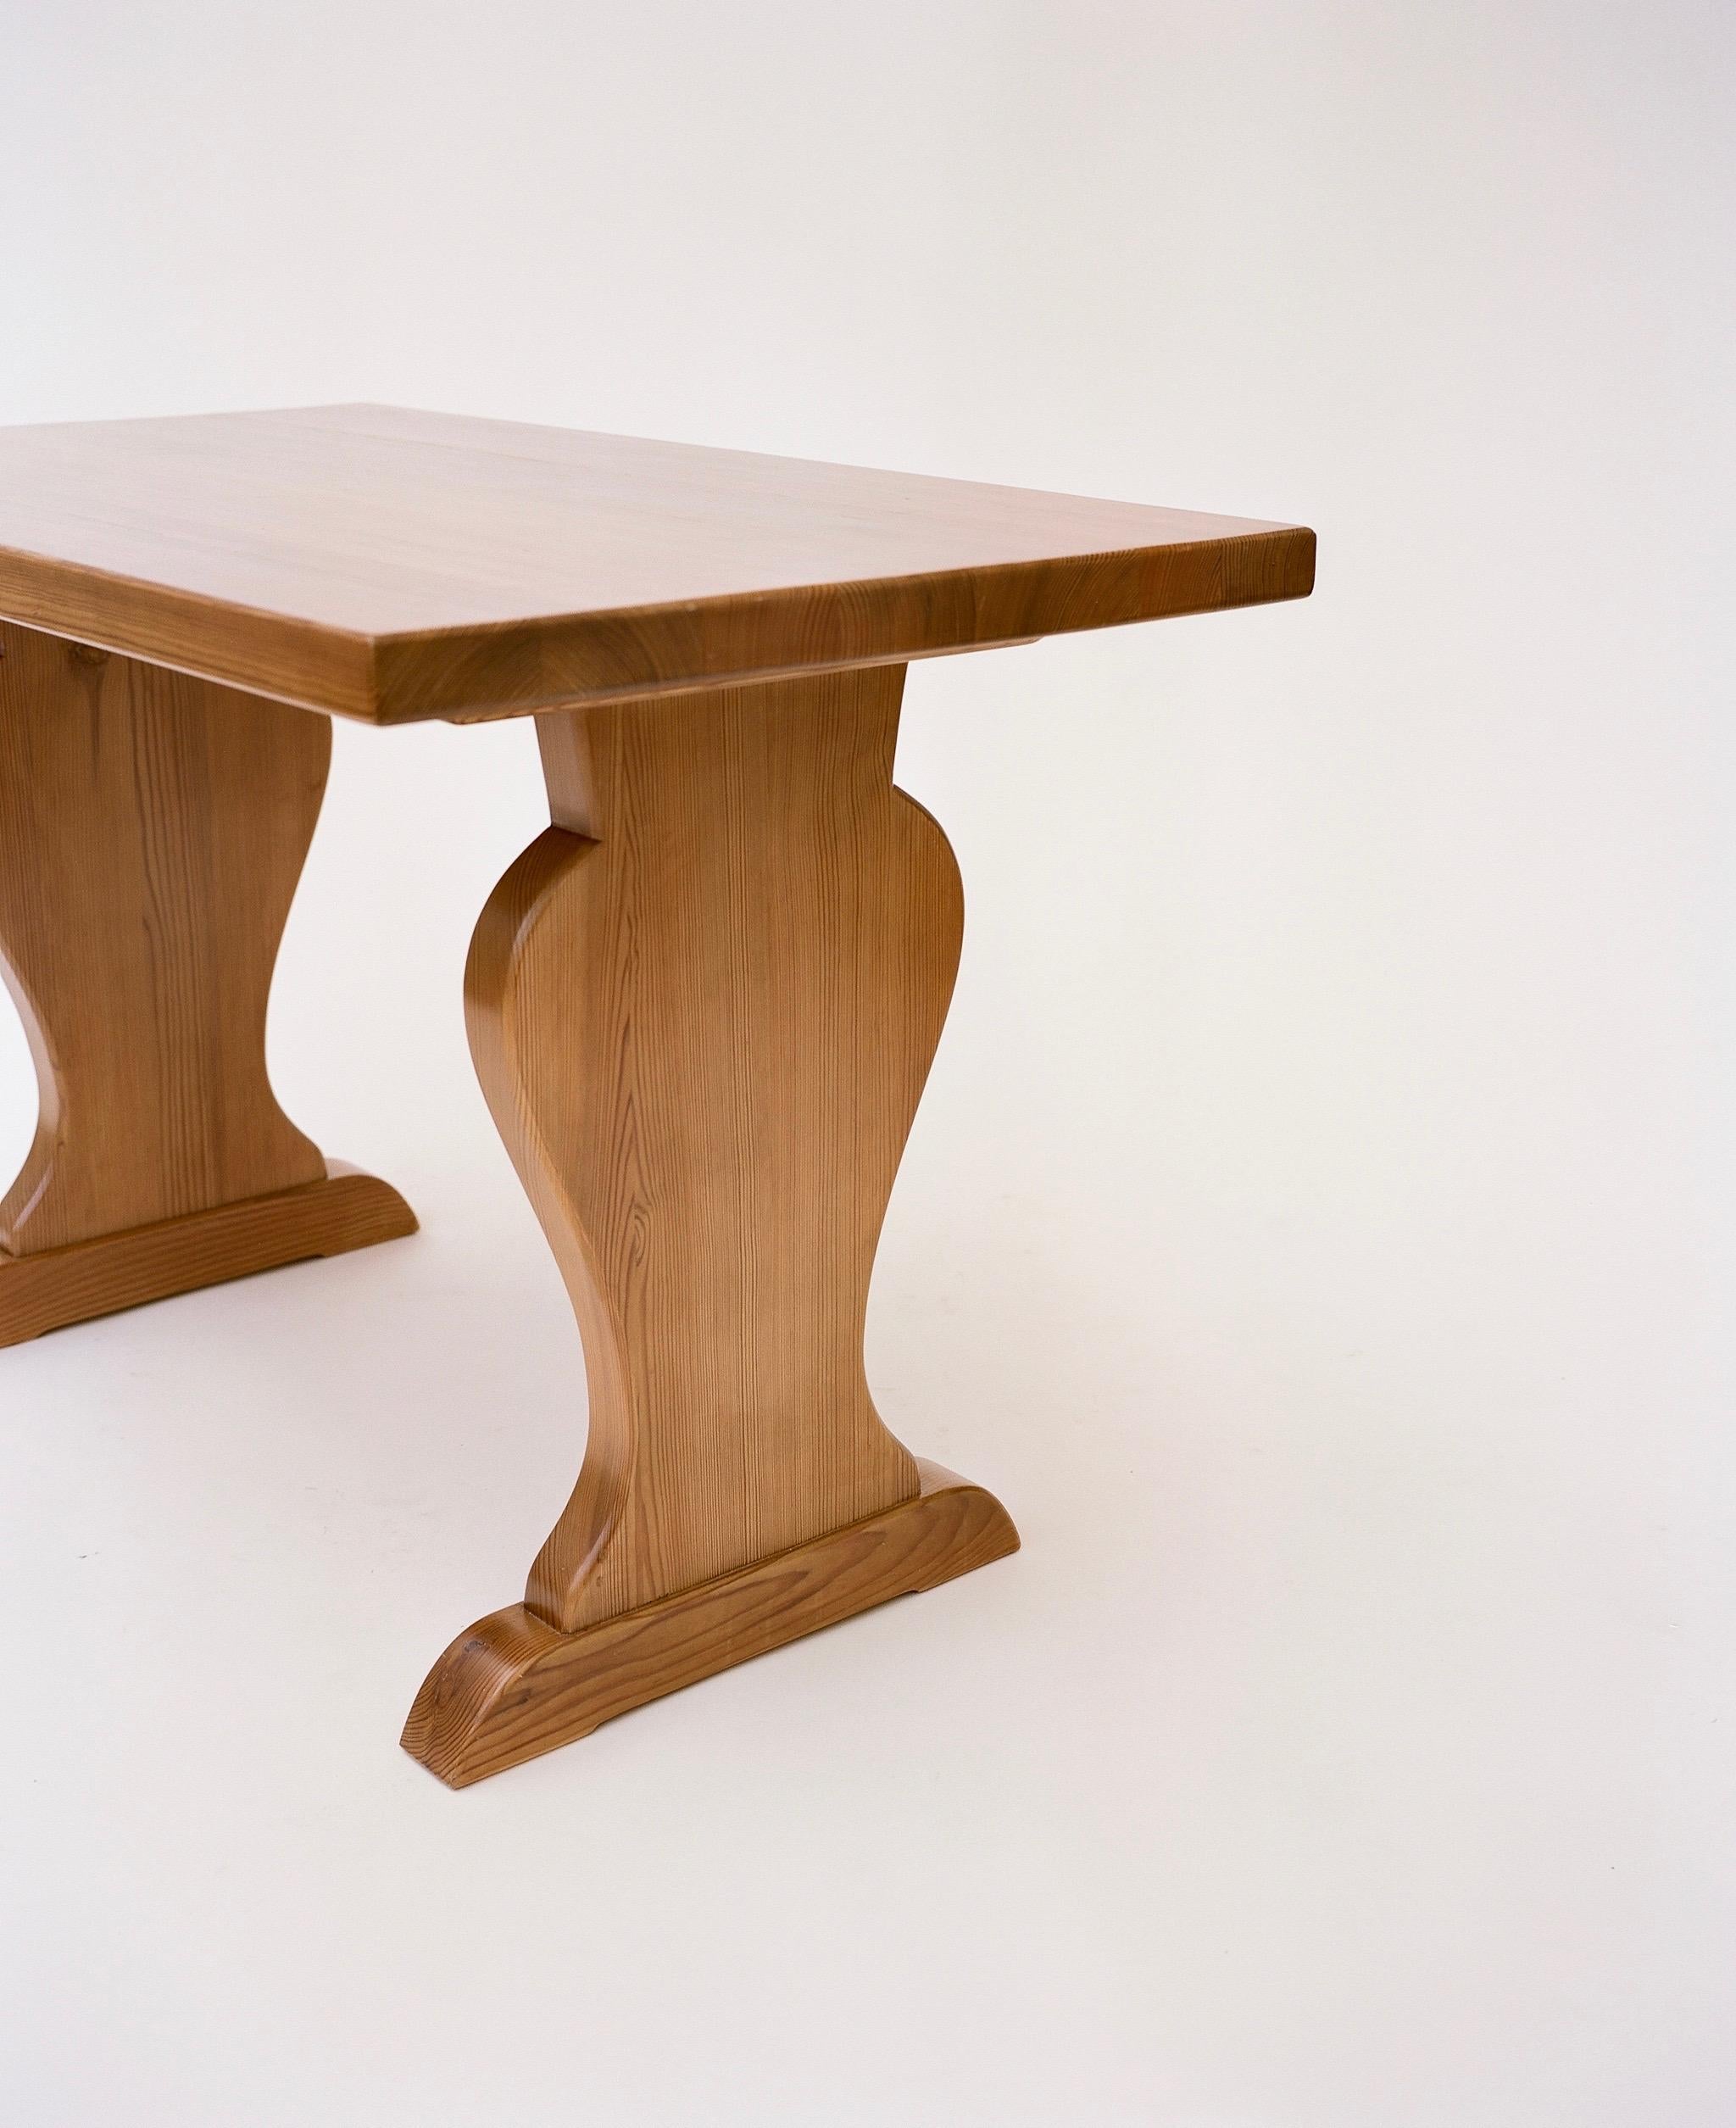 Scandinavian Modern Pair of Axel Einar Hjorth Bedside or Console Tables, c. 1932